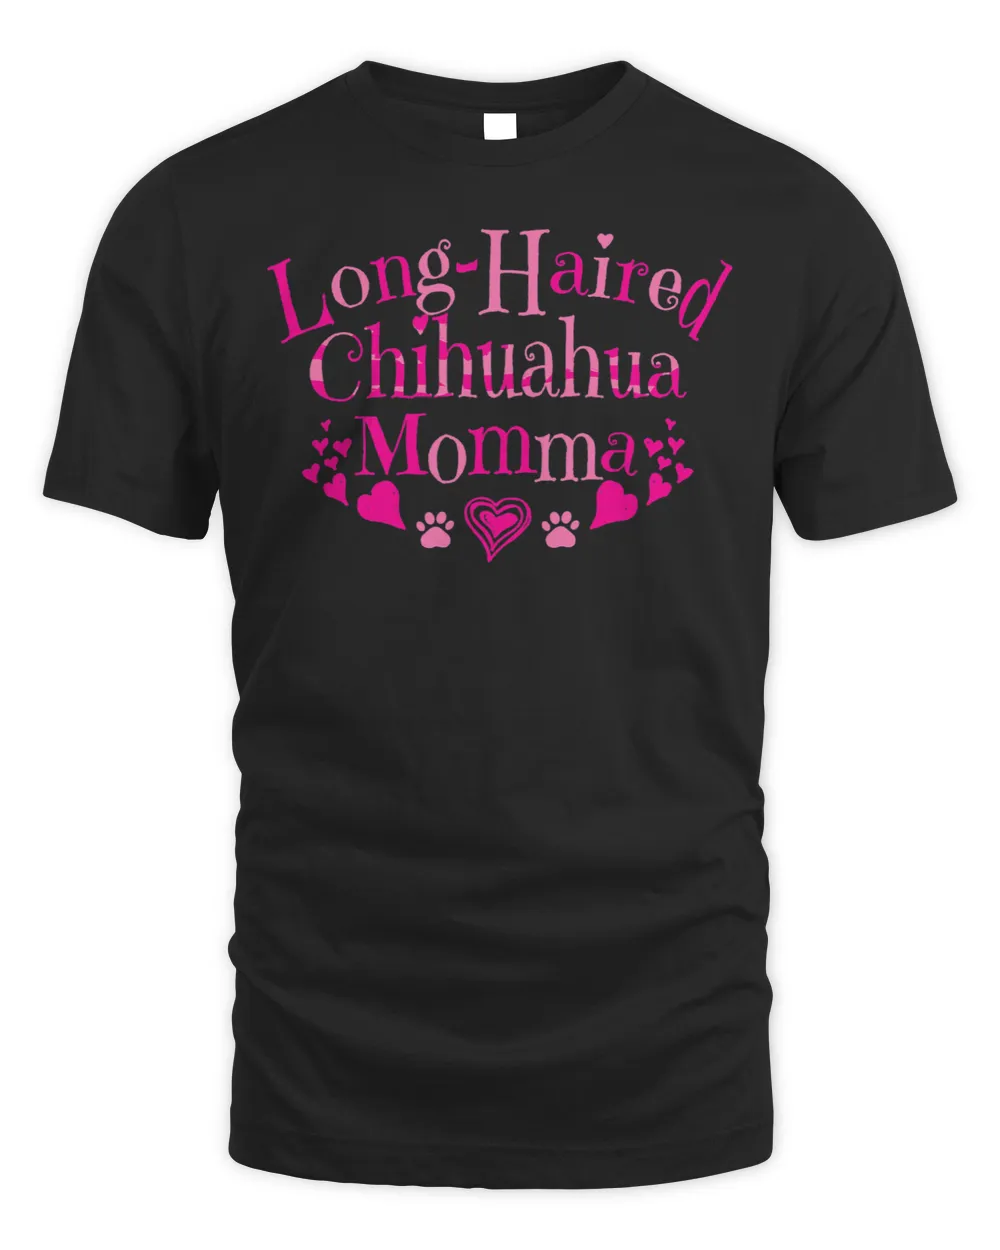 Chihuahuas LongHaired Chihuahua Momma Chi Mama Little Lap Dog Lover Chihuahua Dog